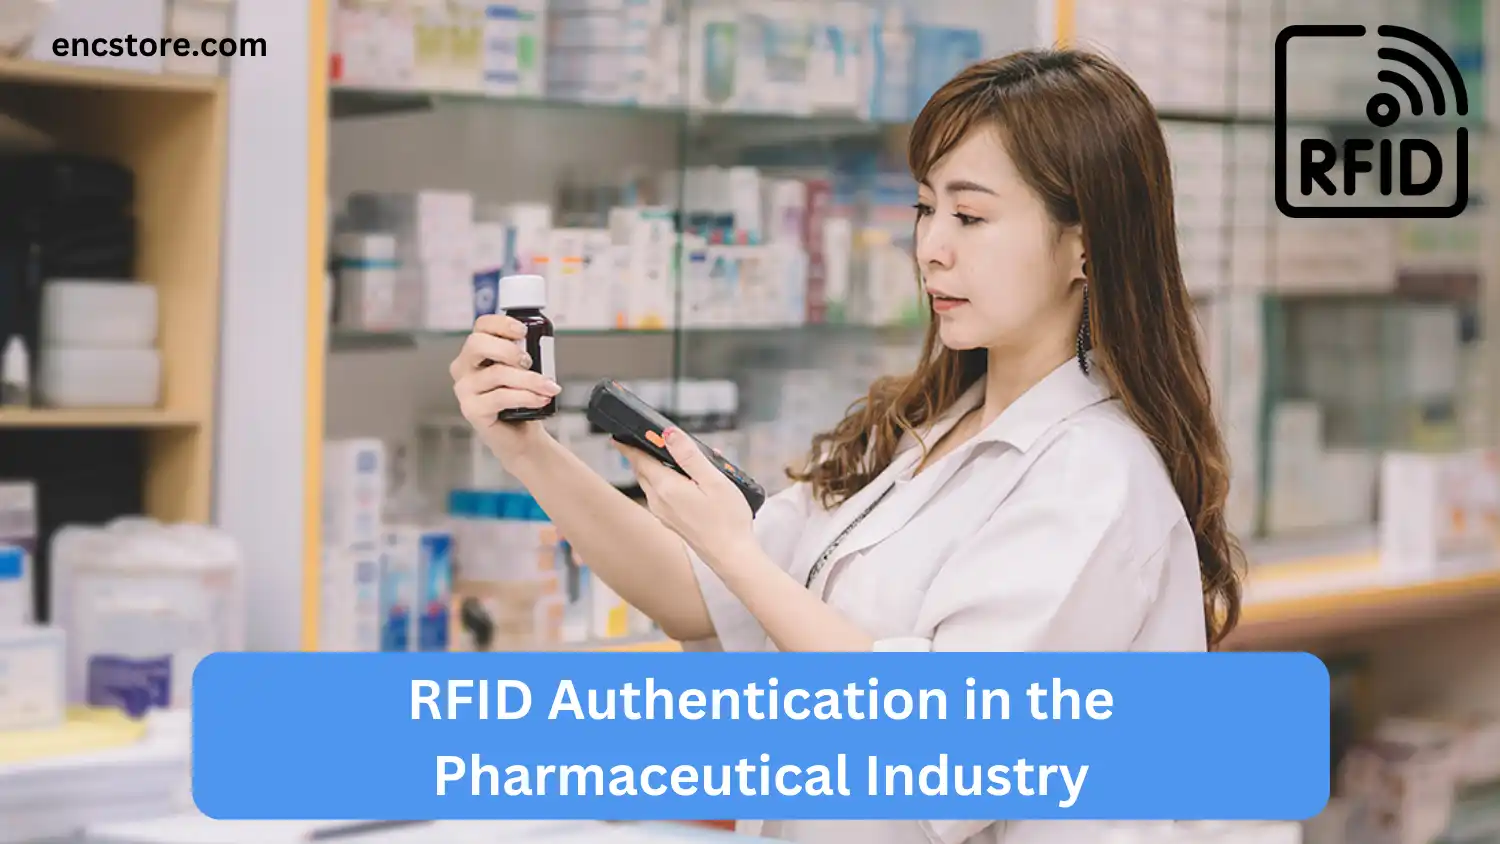 RFID Authentication in the Pharmaceutical Industry